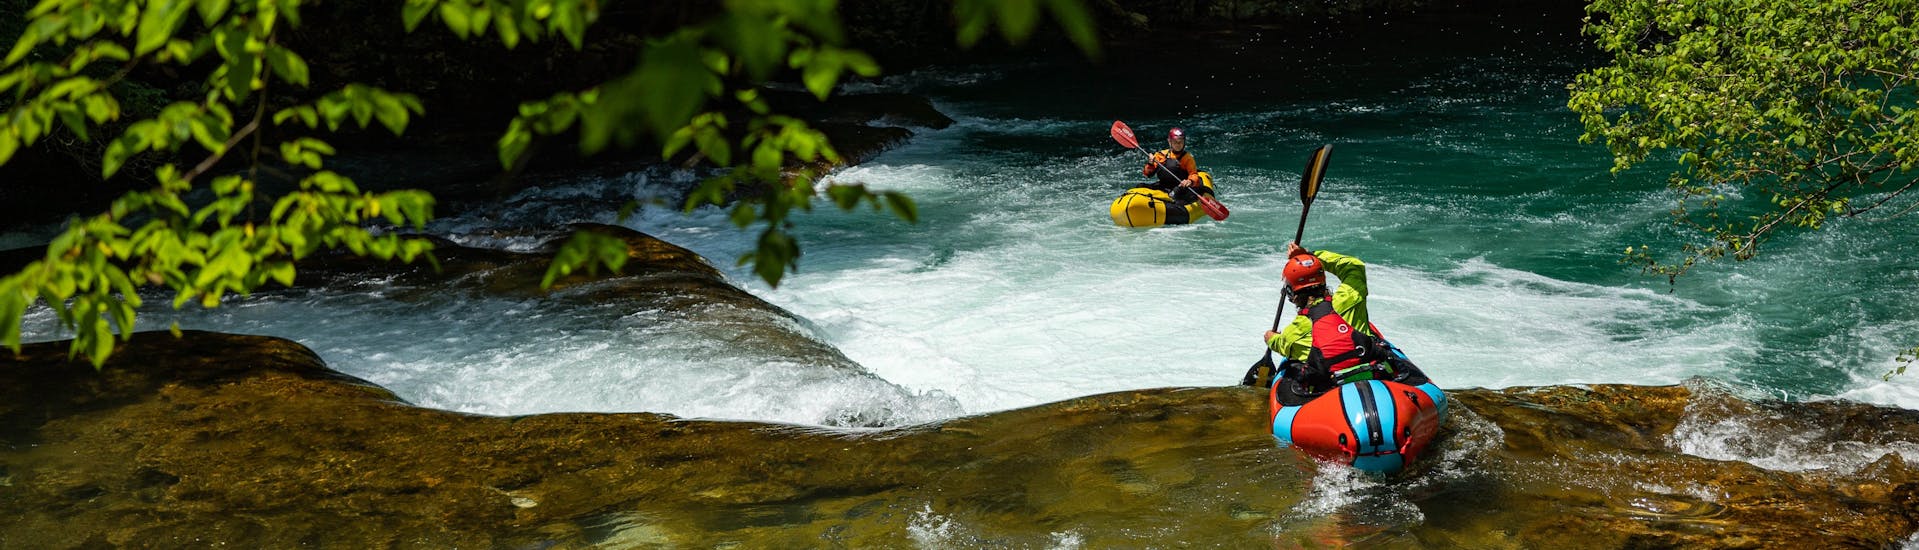 Rafting down a rapid during the packrafting on the Mreznica River hosted by Raftrek Adventure Travel Croatia.